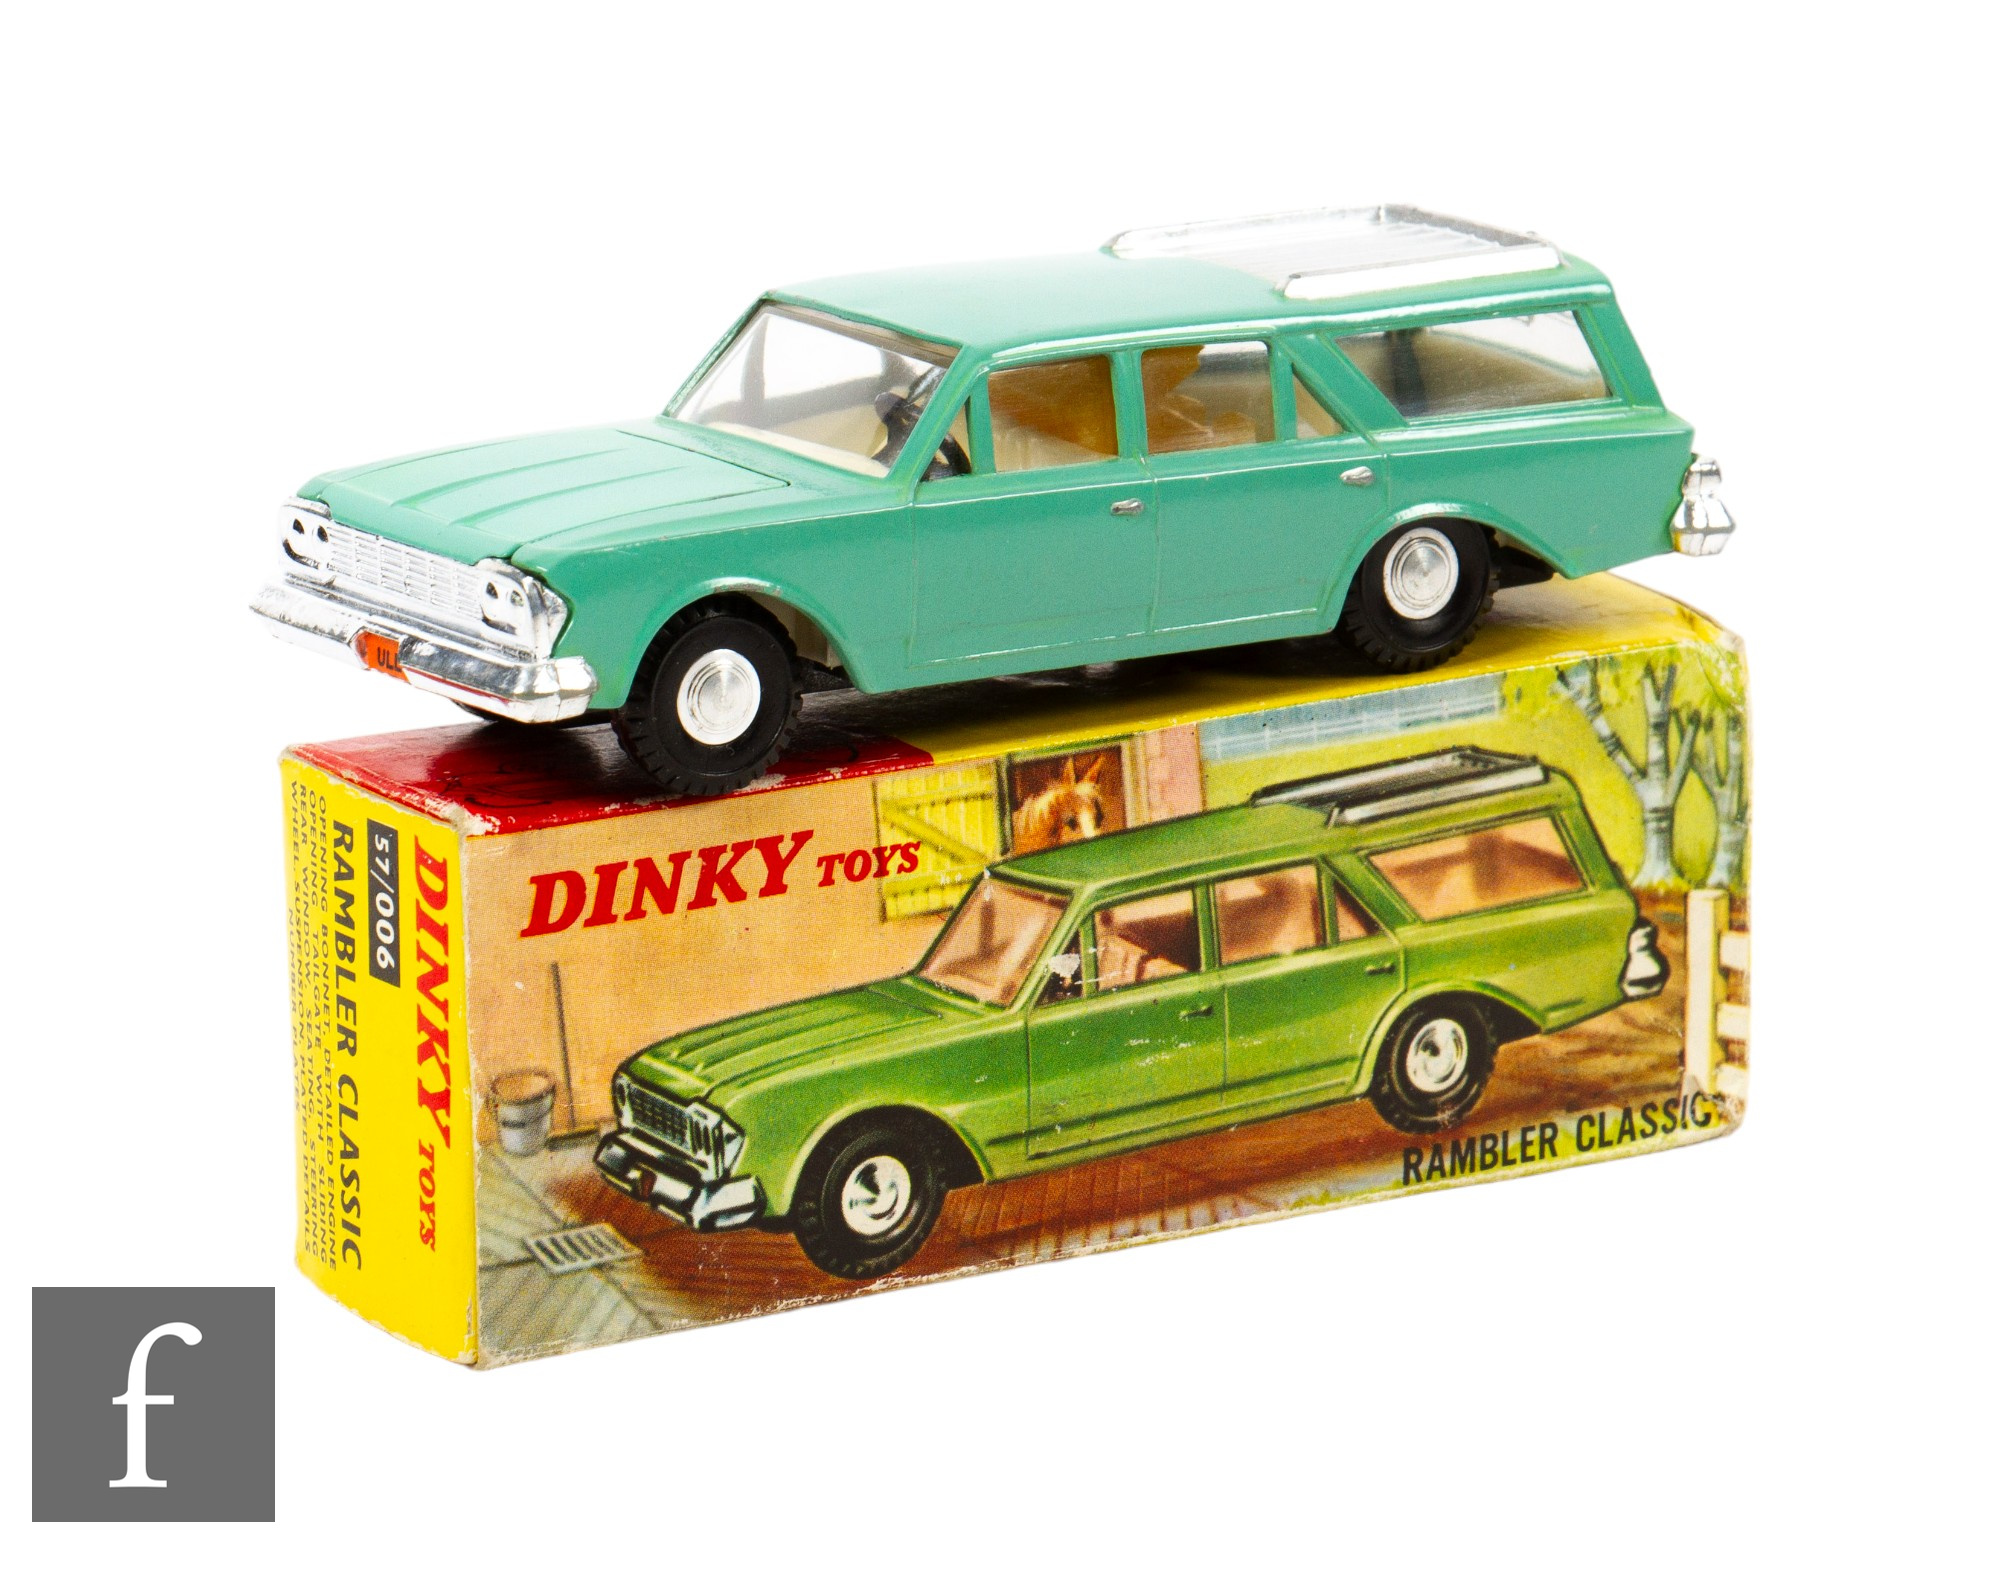 A Dinky 57/006 Rambler Classic Station Wagon in green with silver rear roof panel, ivory interior